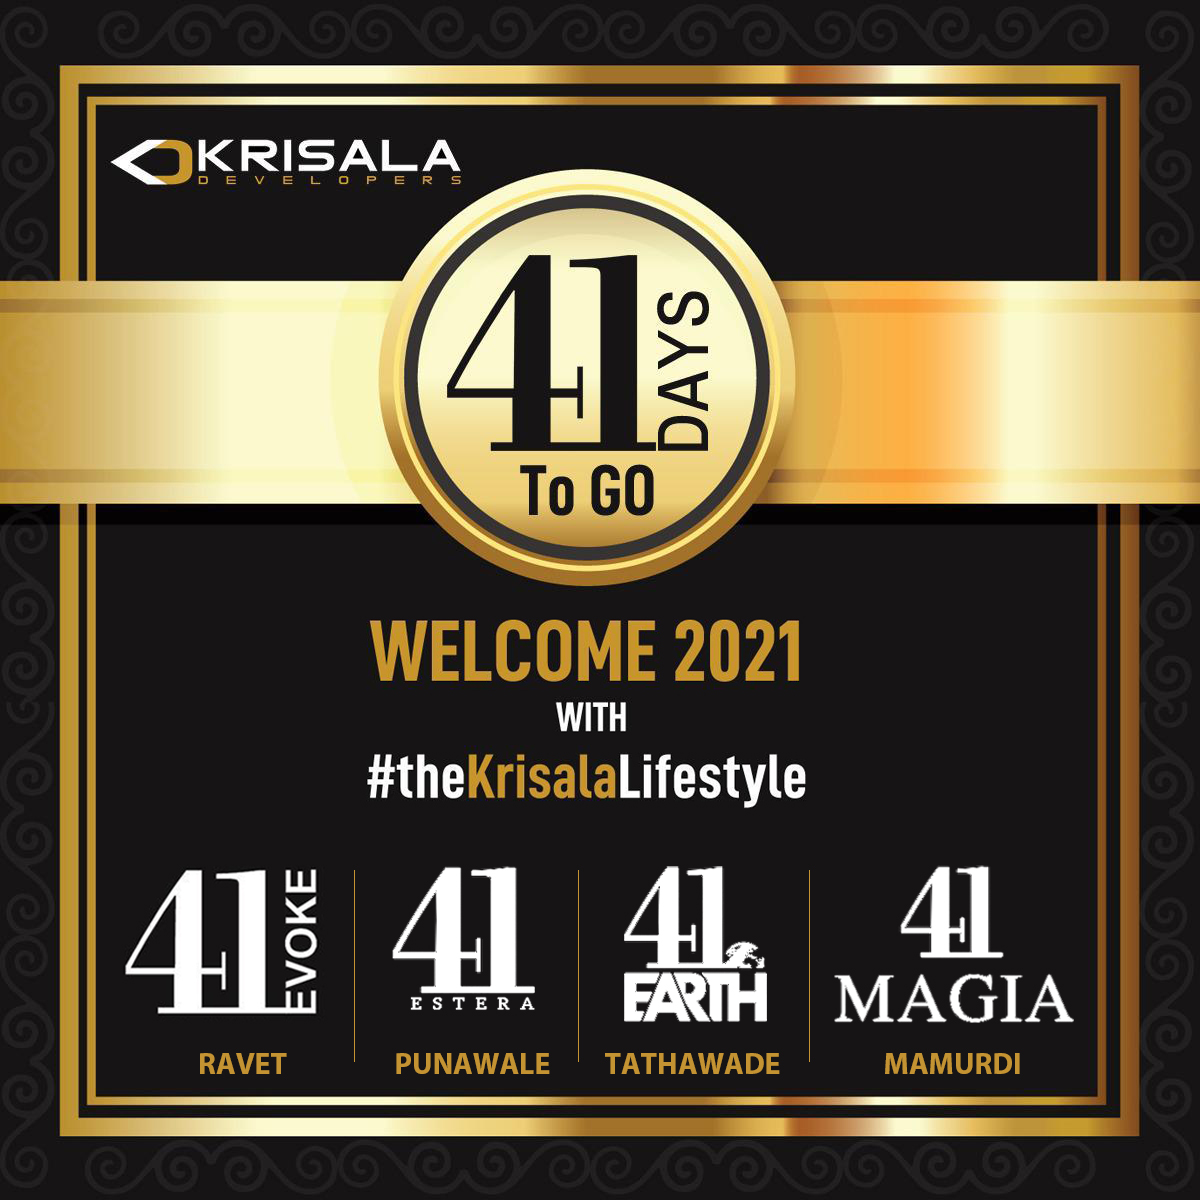 Reminder: Only 41 Days to go in 2020!
You can still be a part of #theKrisalaLifestyle!

Krisala Developers offers the best homes in Ravet, Punawale, Tathawade, Mamurdi, and other localities of Pune & PCMC.

Begin your life as a #KrisalaHomeOwner today!